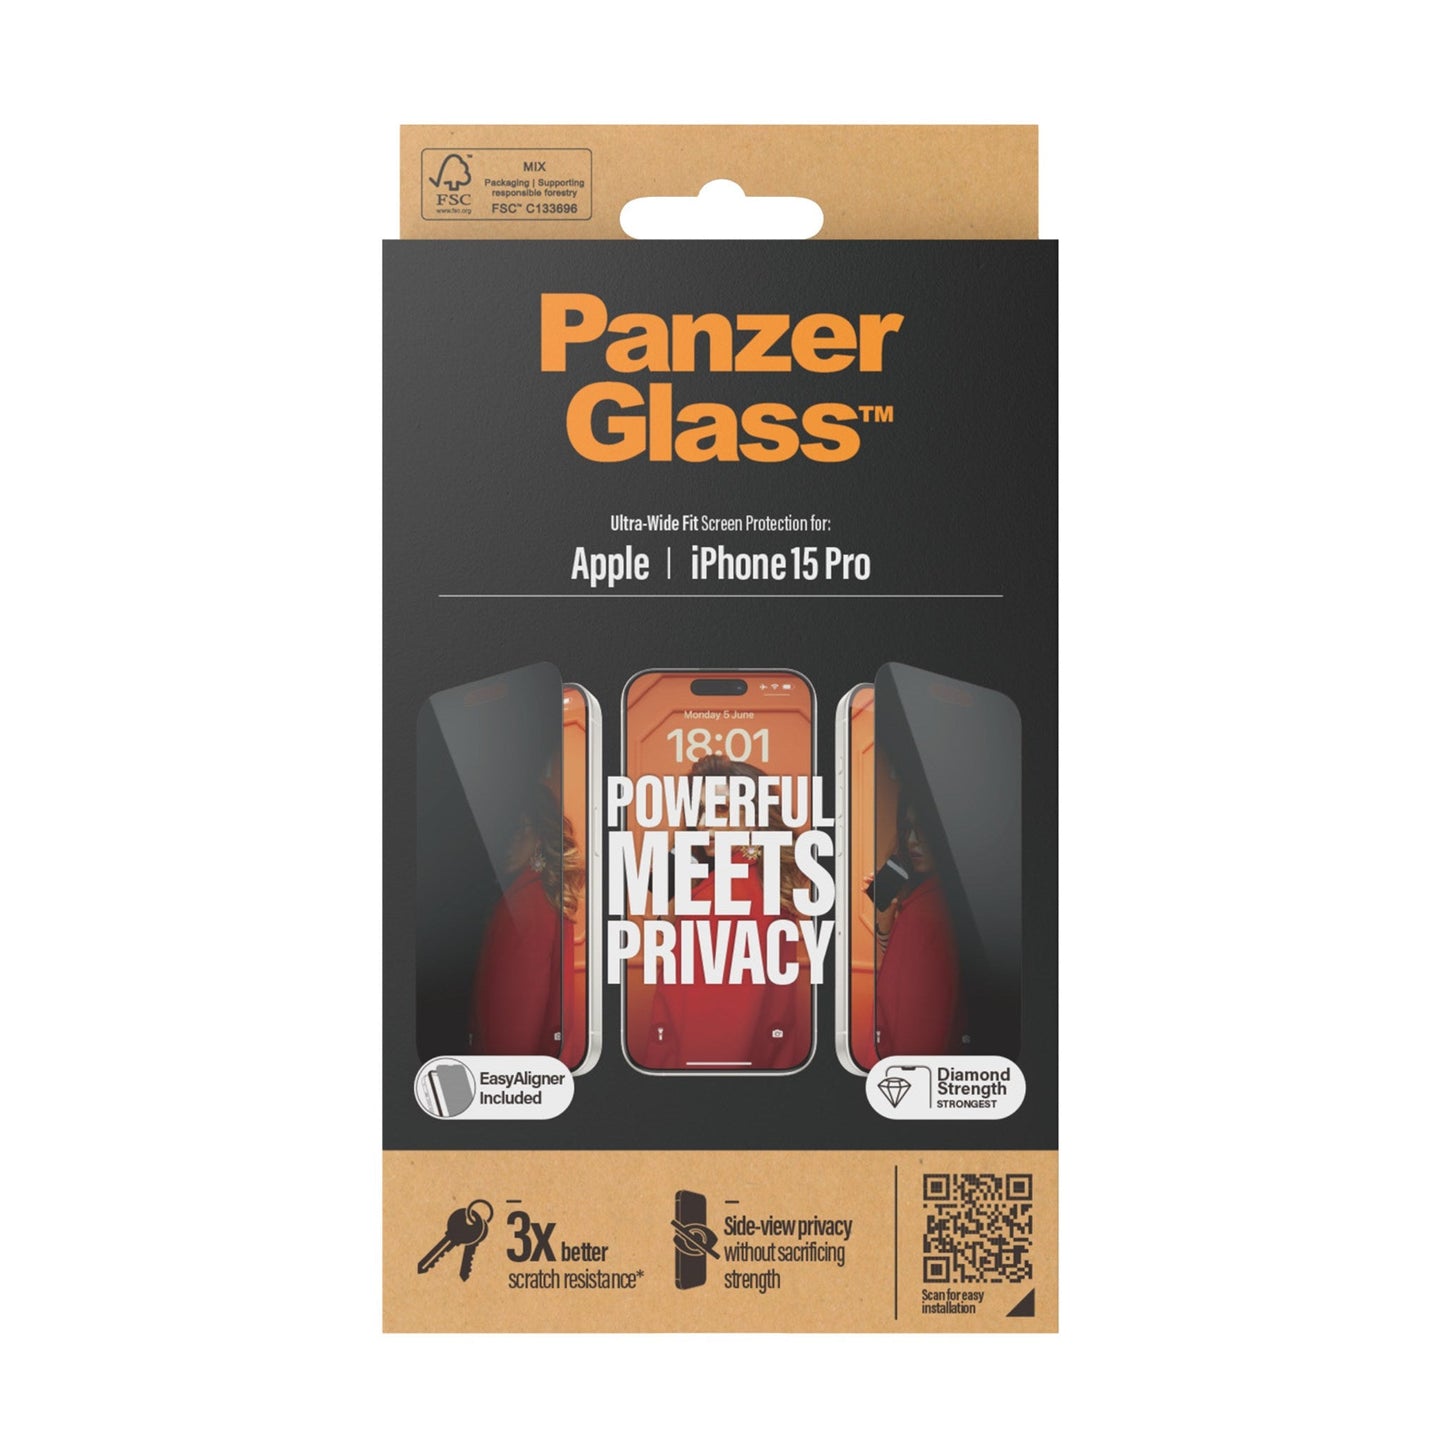 PanzerGlass Ultra Wide Fit Screen Protector - Apple iPhone 15 Pro / Privacy